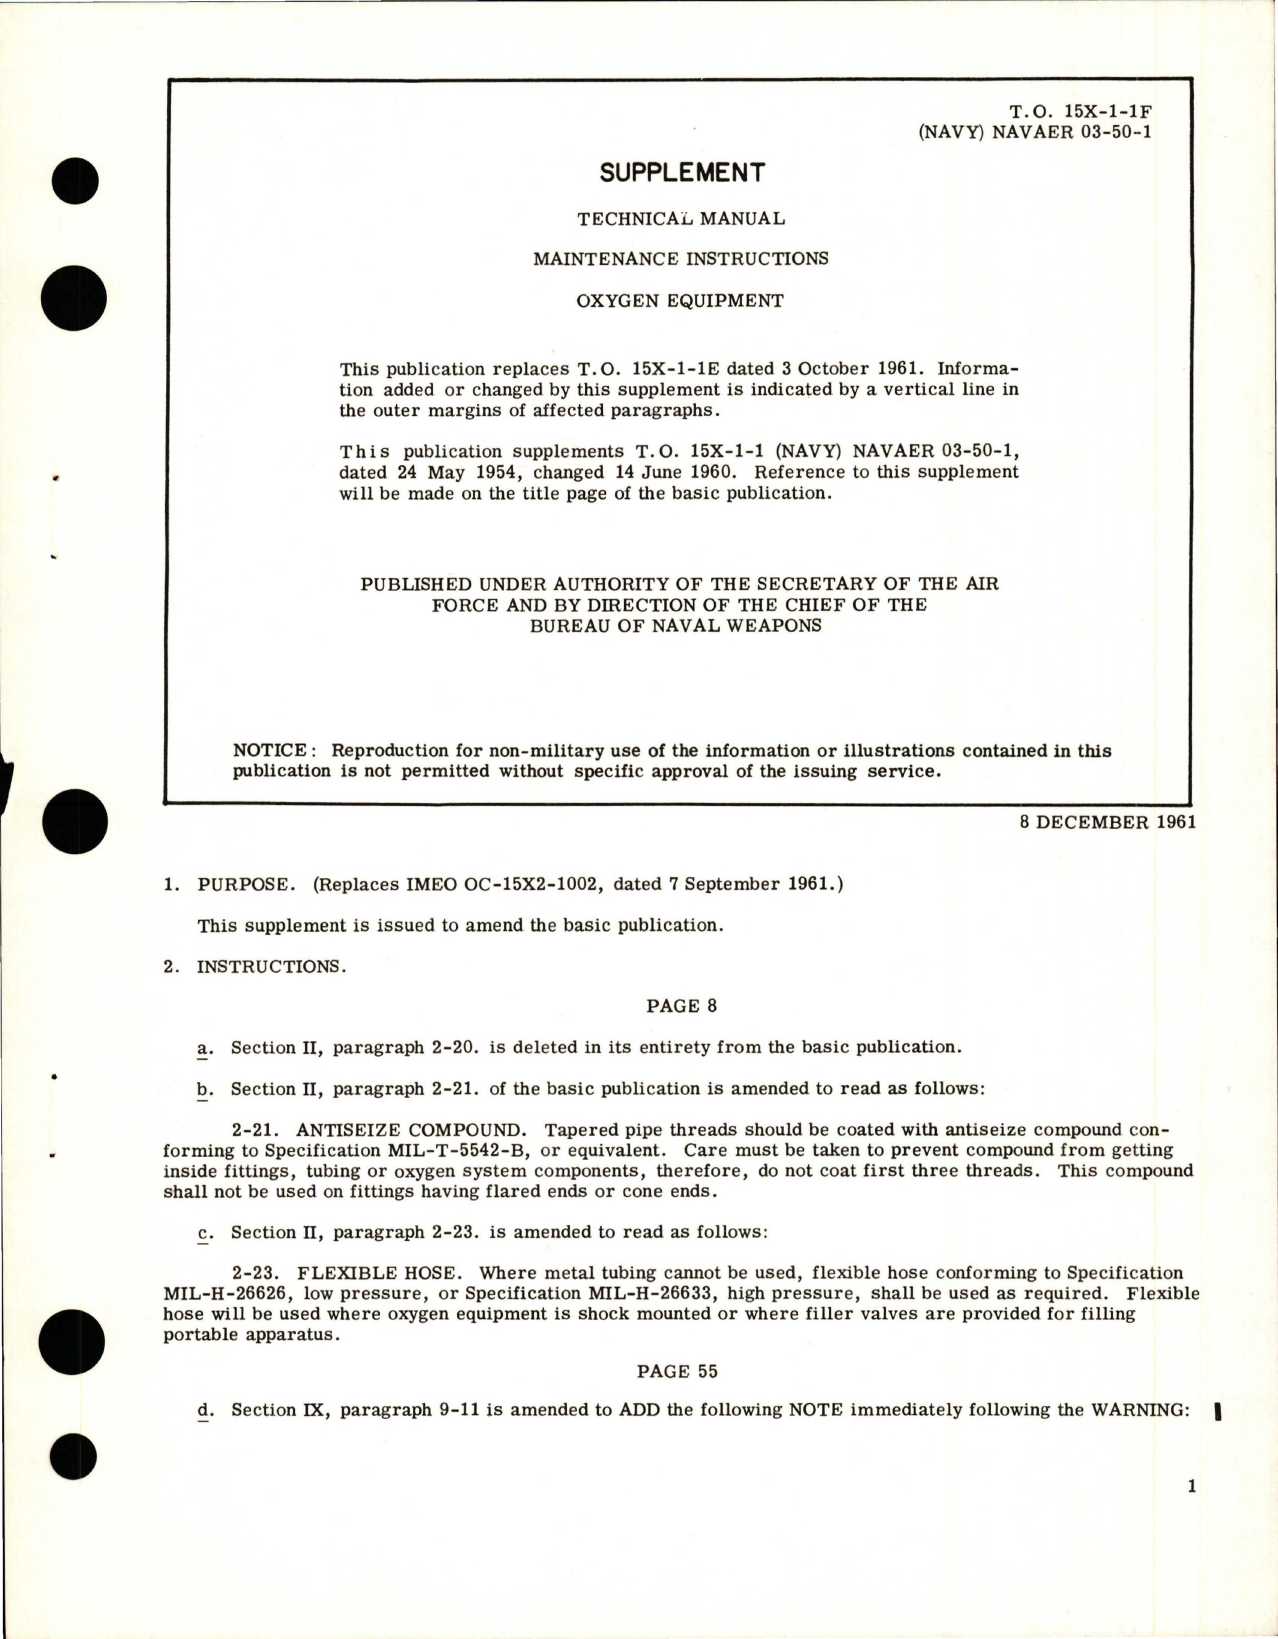 Sample page 1 from AirCorps Library document: Supplement to Maintenance Instructions for Oxygen Equipment